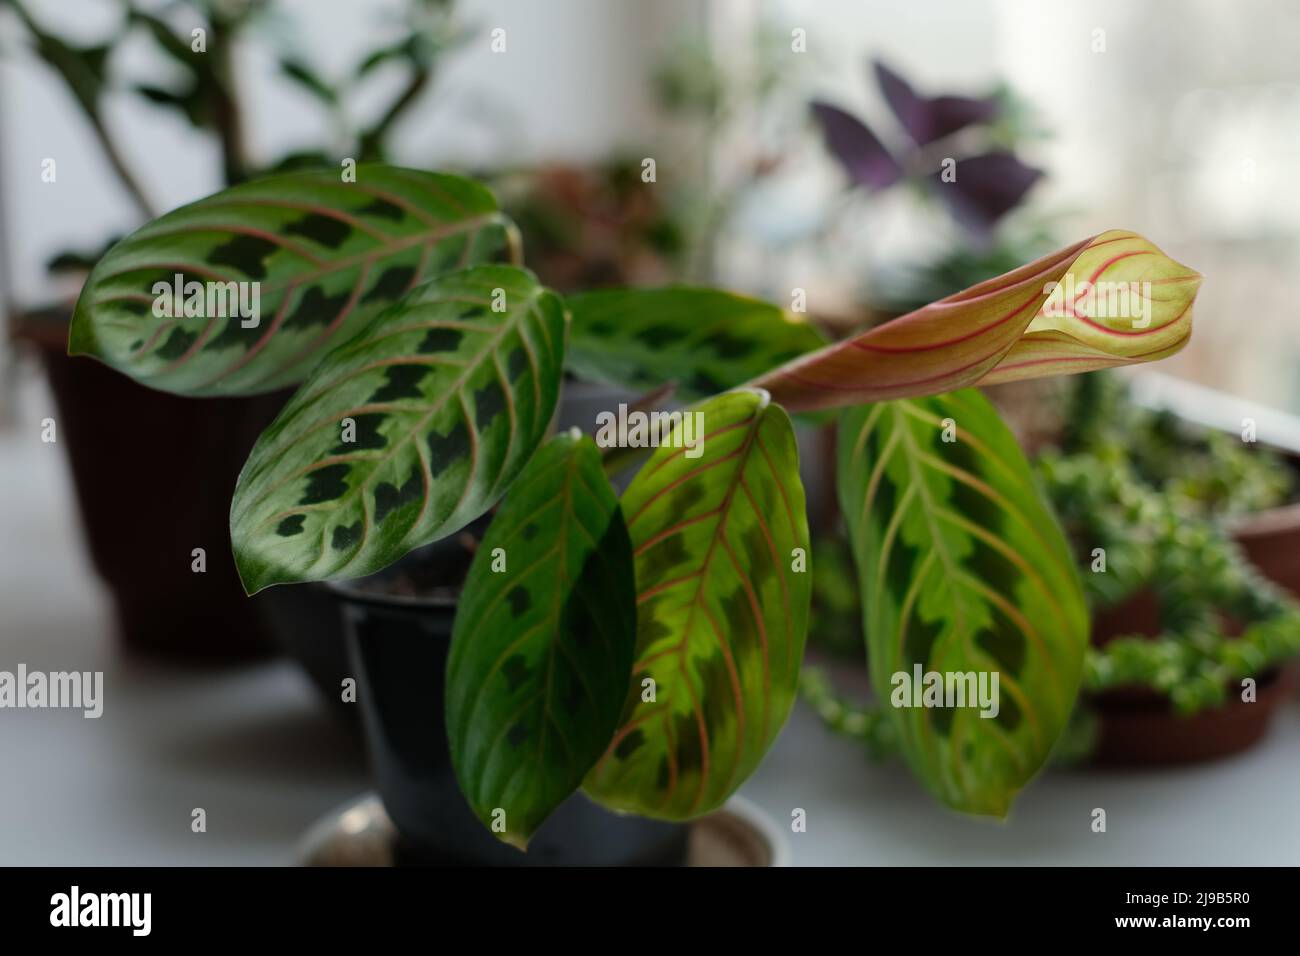 Prayer plant on a windowsill. Maranta flower surrounded by other houseplant. Green leaves with dark spots and red veins. Home planting. New leaf growt Stock Photo